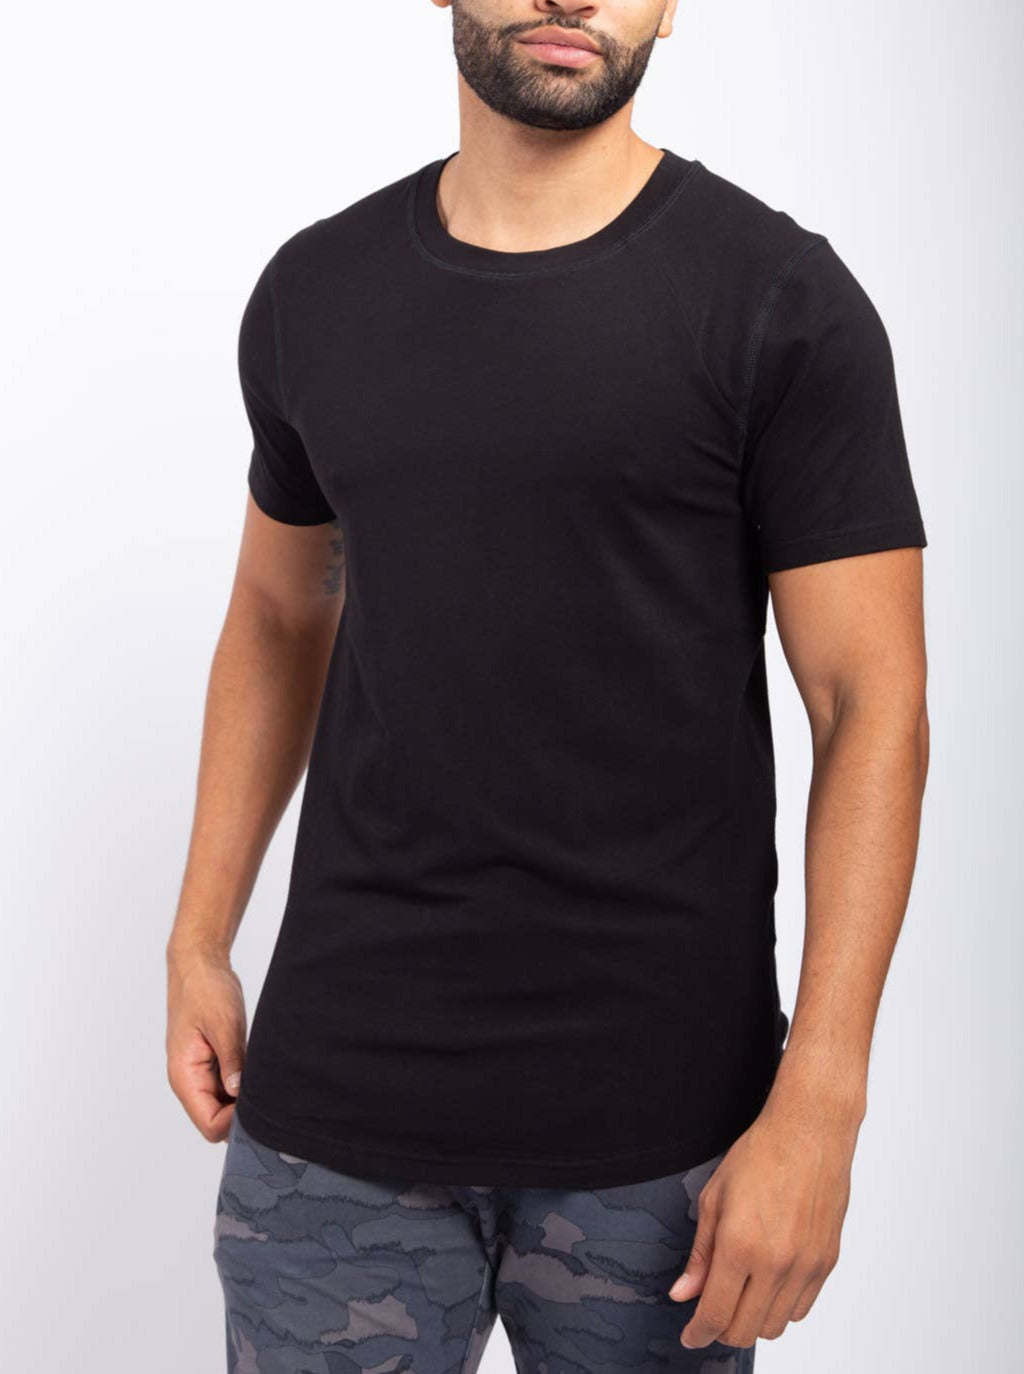 male model wearing black curved hem tee with camo pants